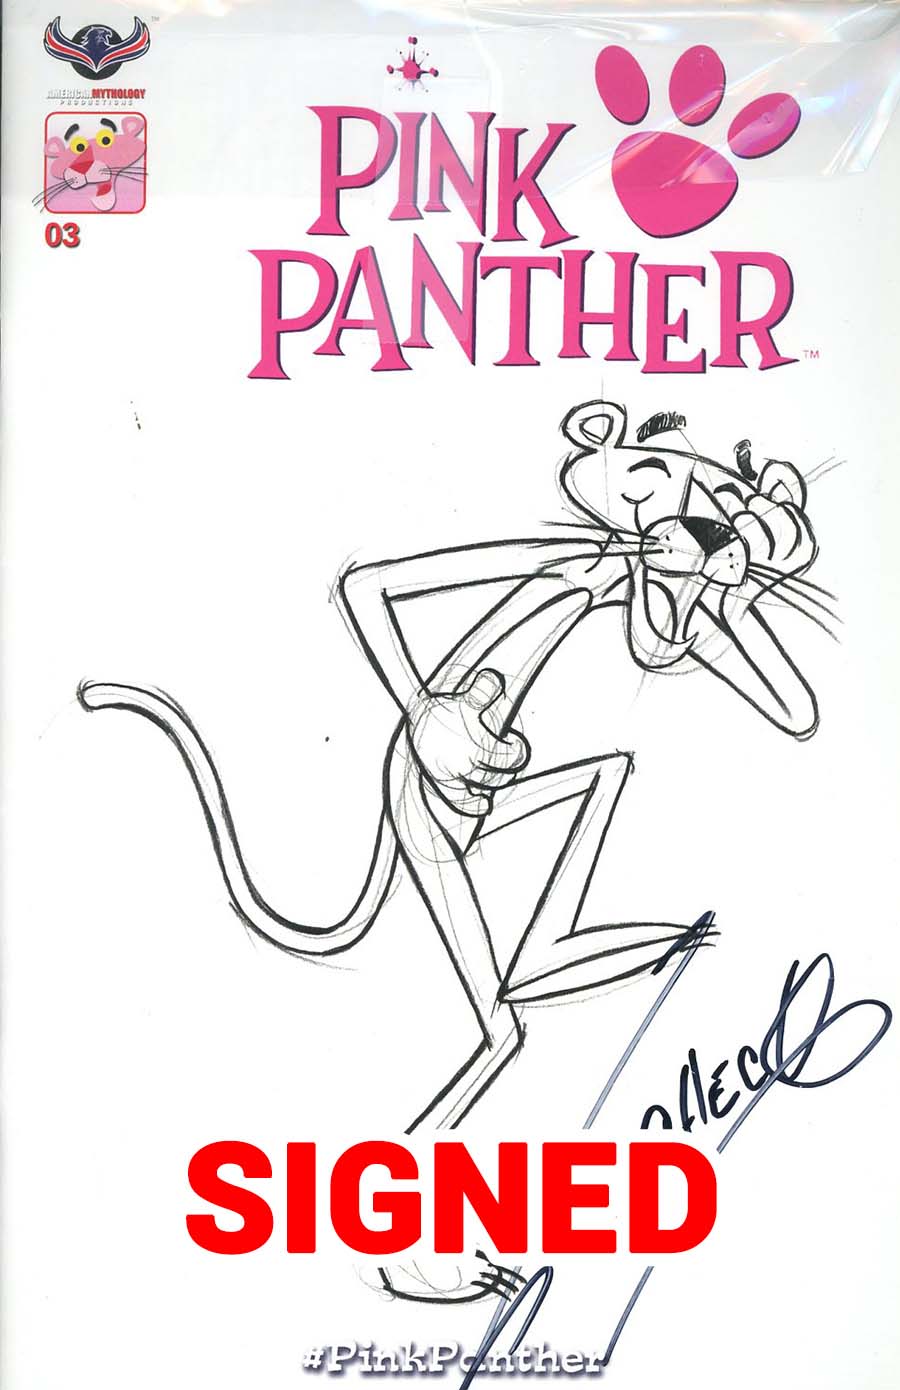 Pink Panther Vol 3 #1-3 Sketch Covers Set Signed Edition